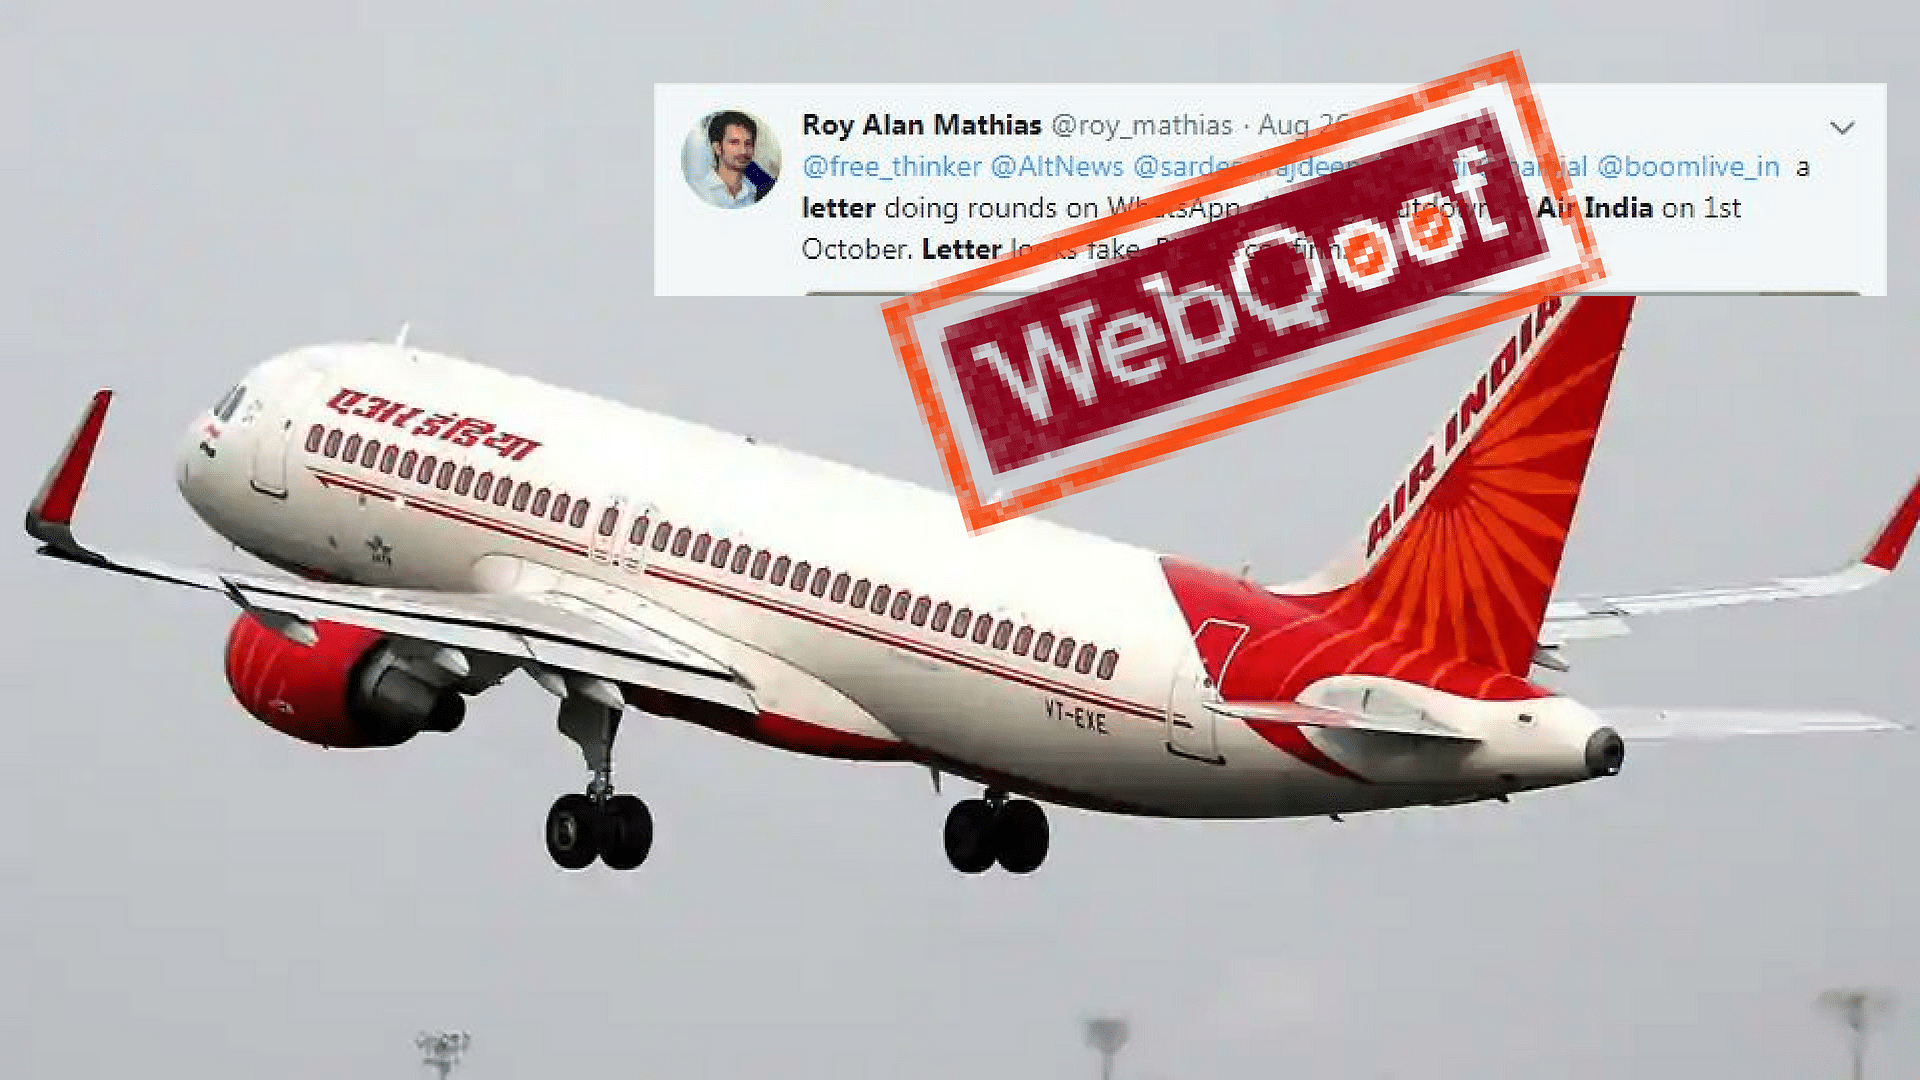 The letter claiming to be an Air India staff notification has been proved to be fake.